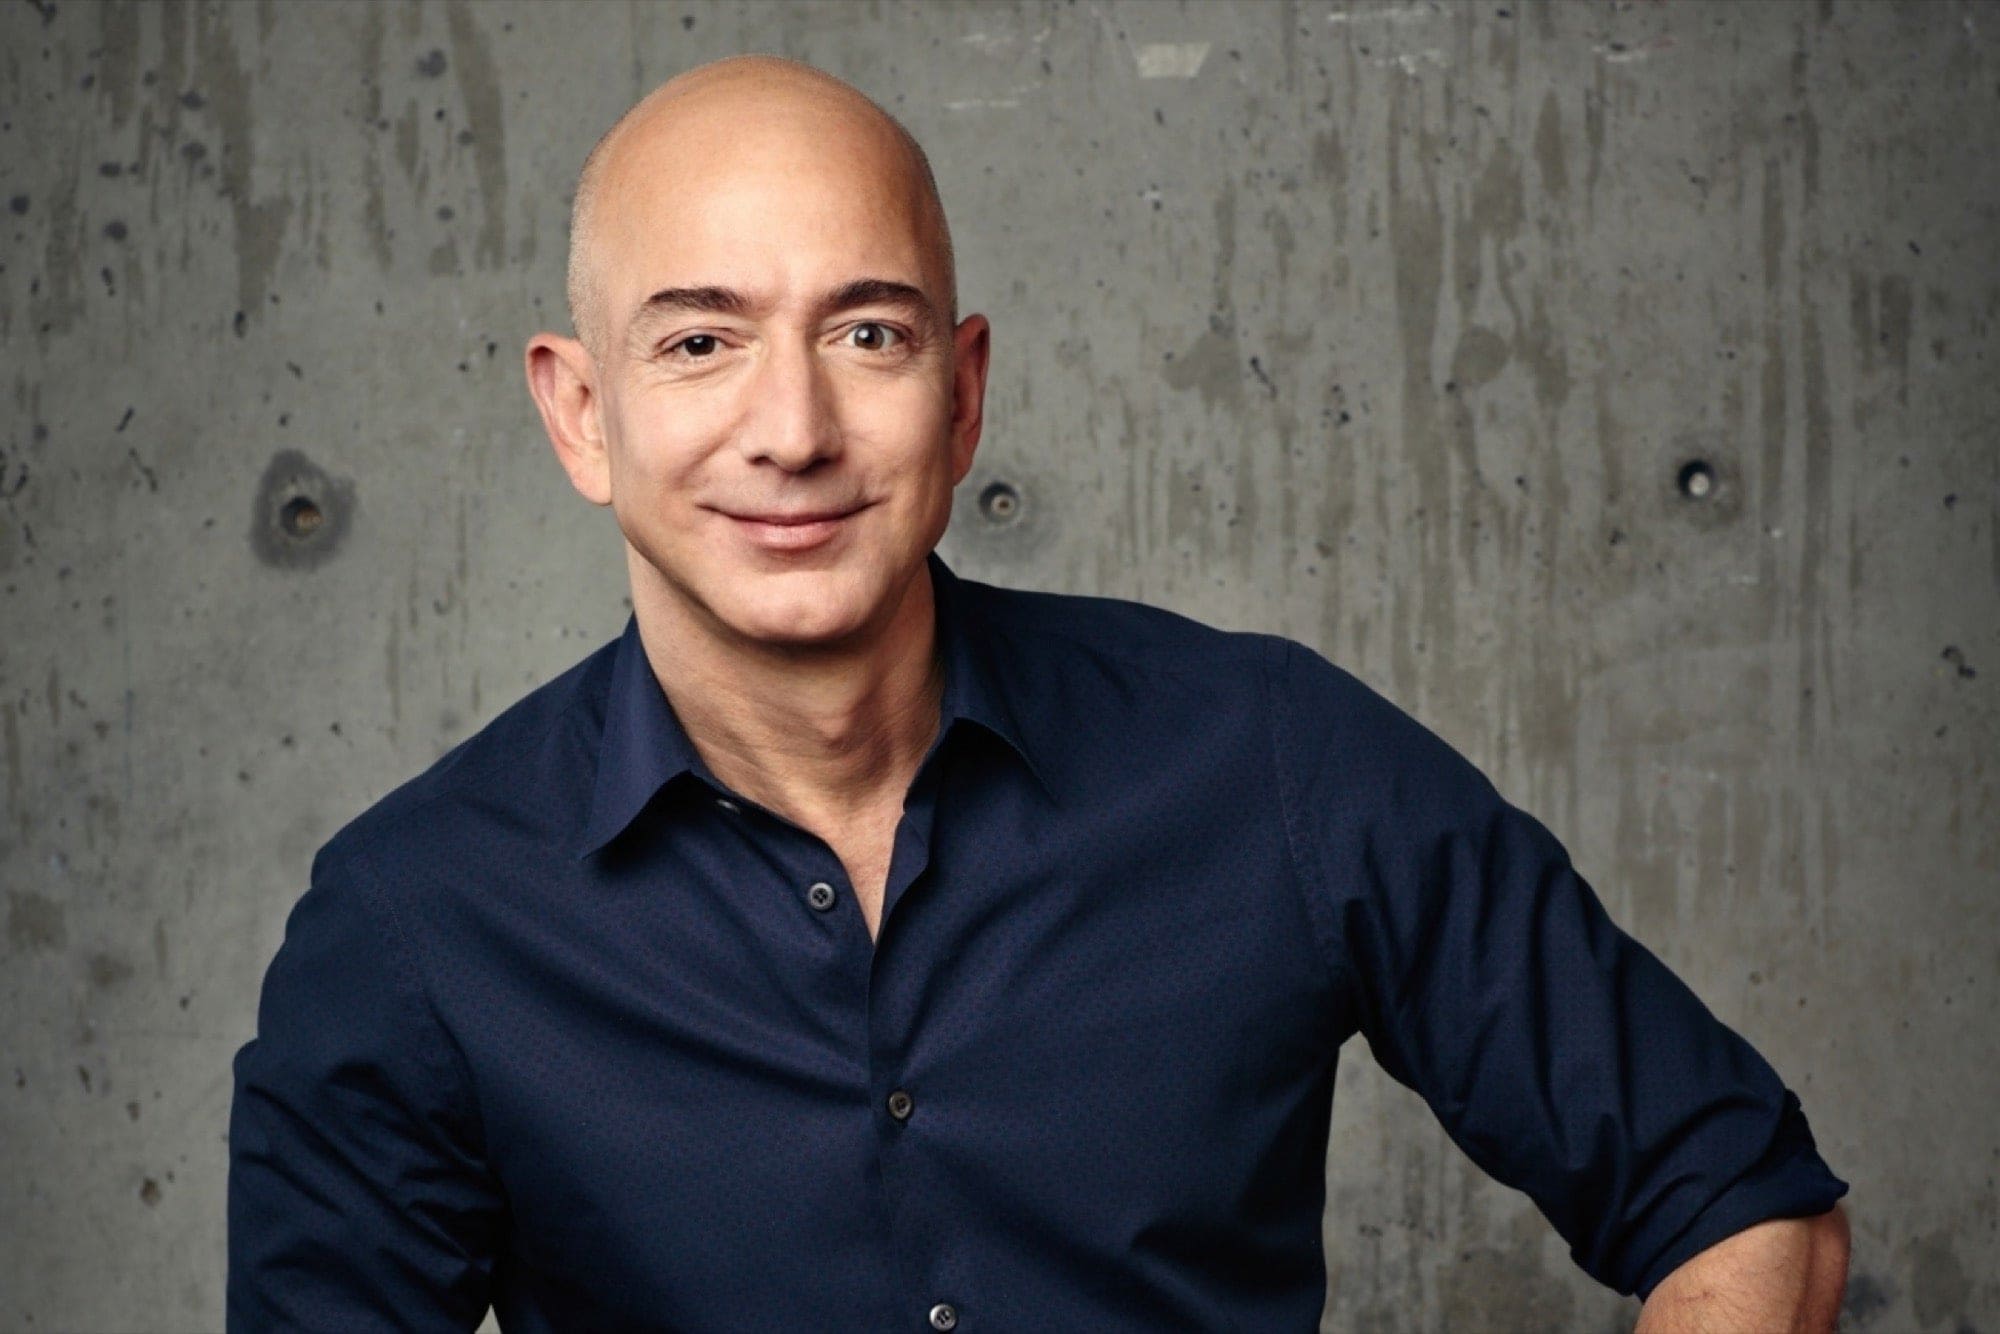 Jeff Bezos           West Age, Height, Wife, Family – Biographyprofiles